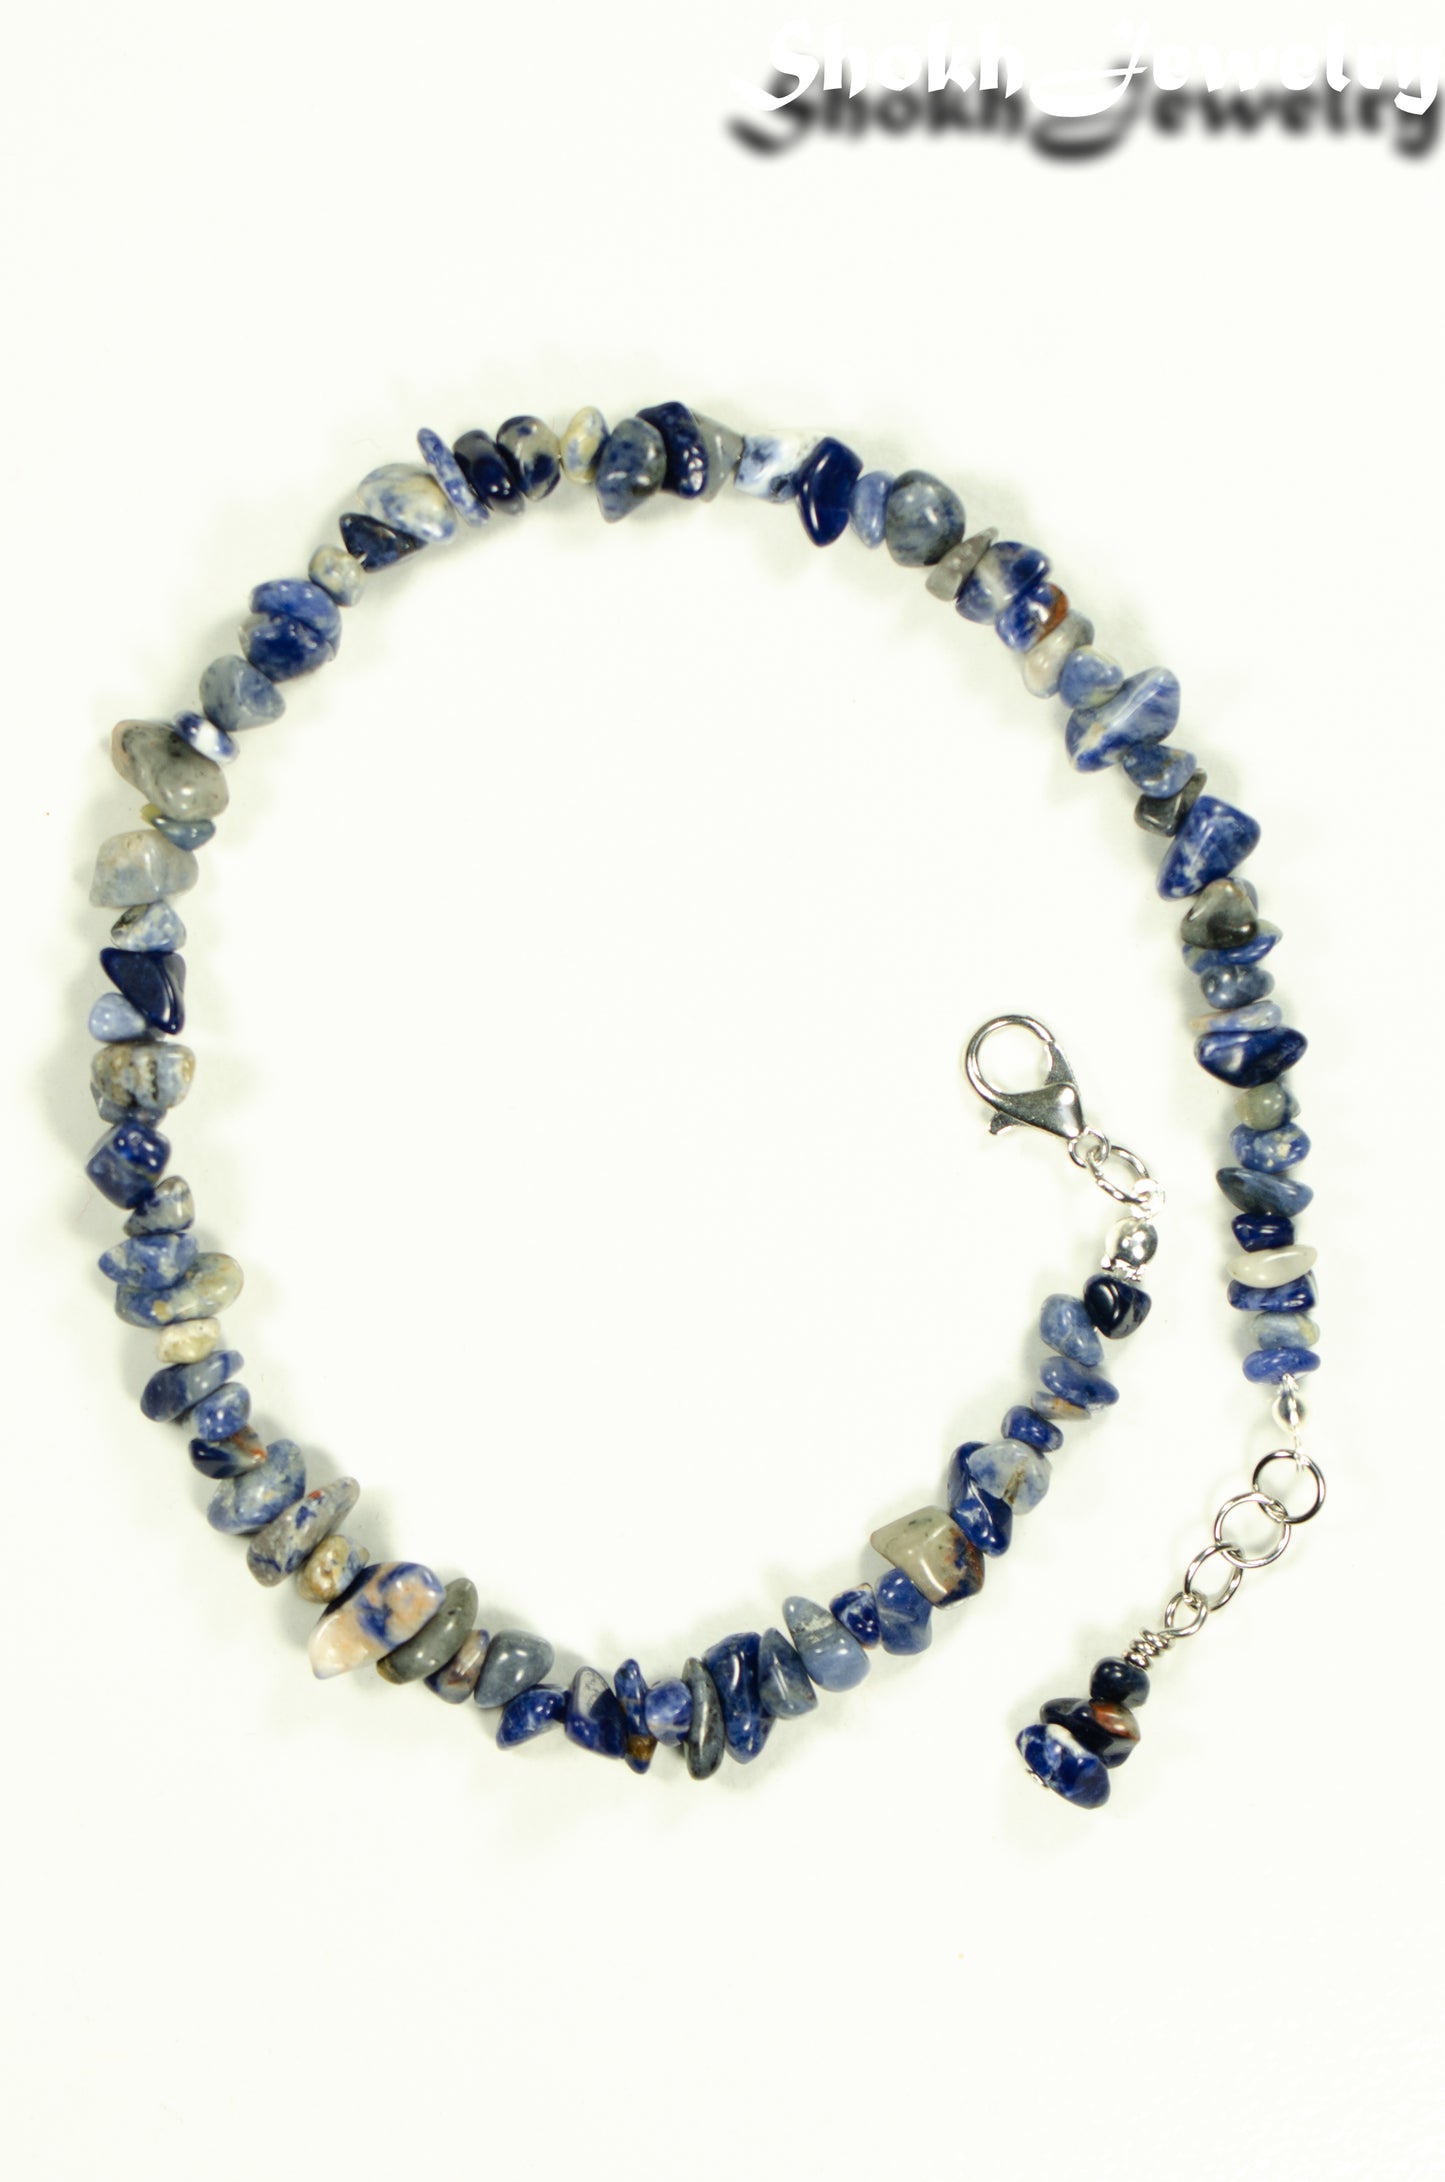 Top view of Natural Sodalite Crystal Chip Anklet.